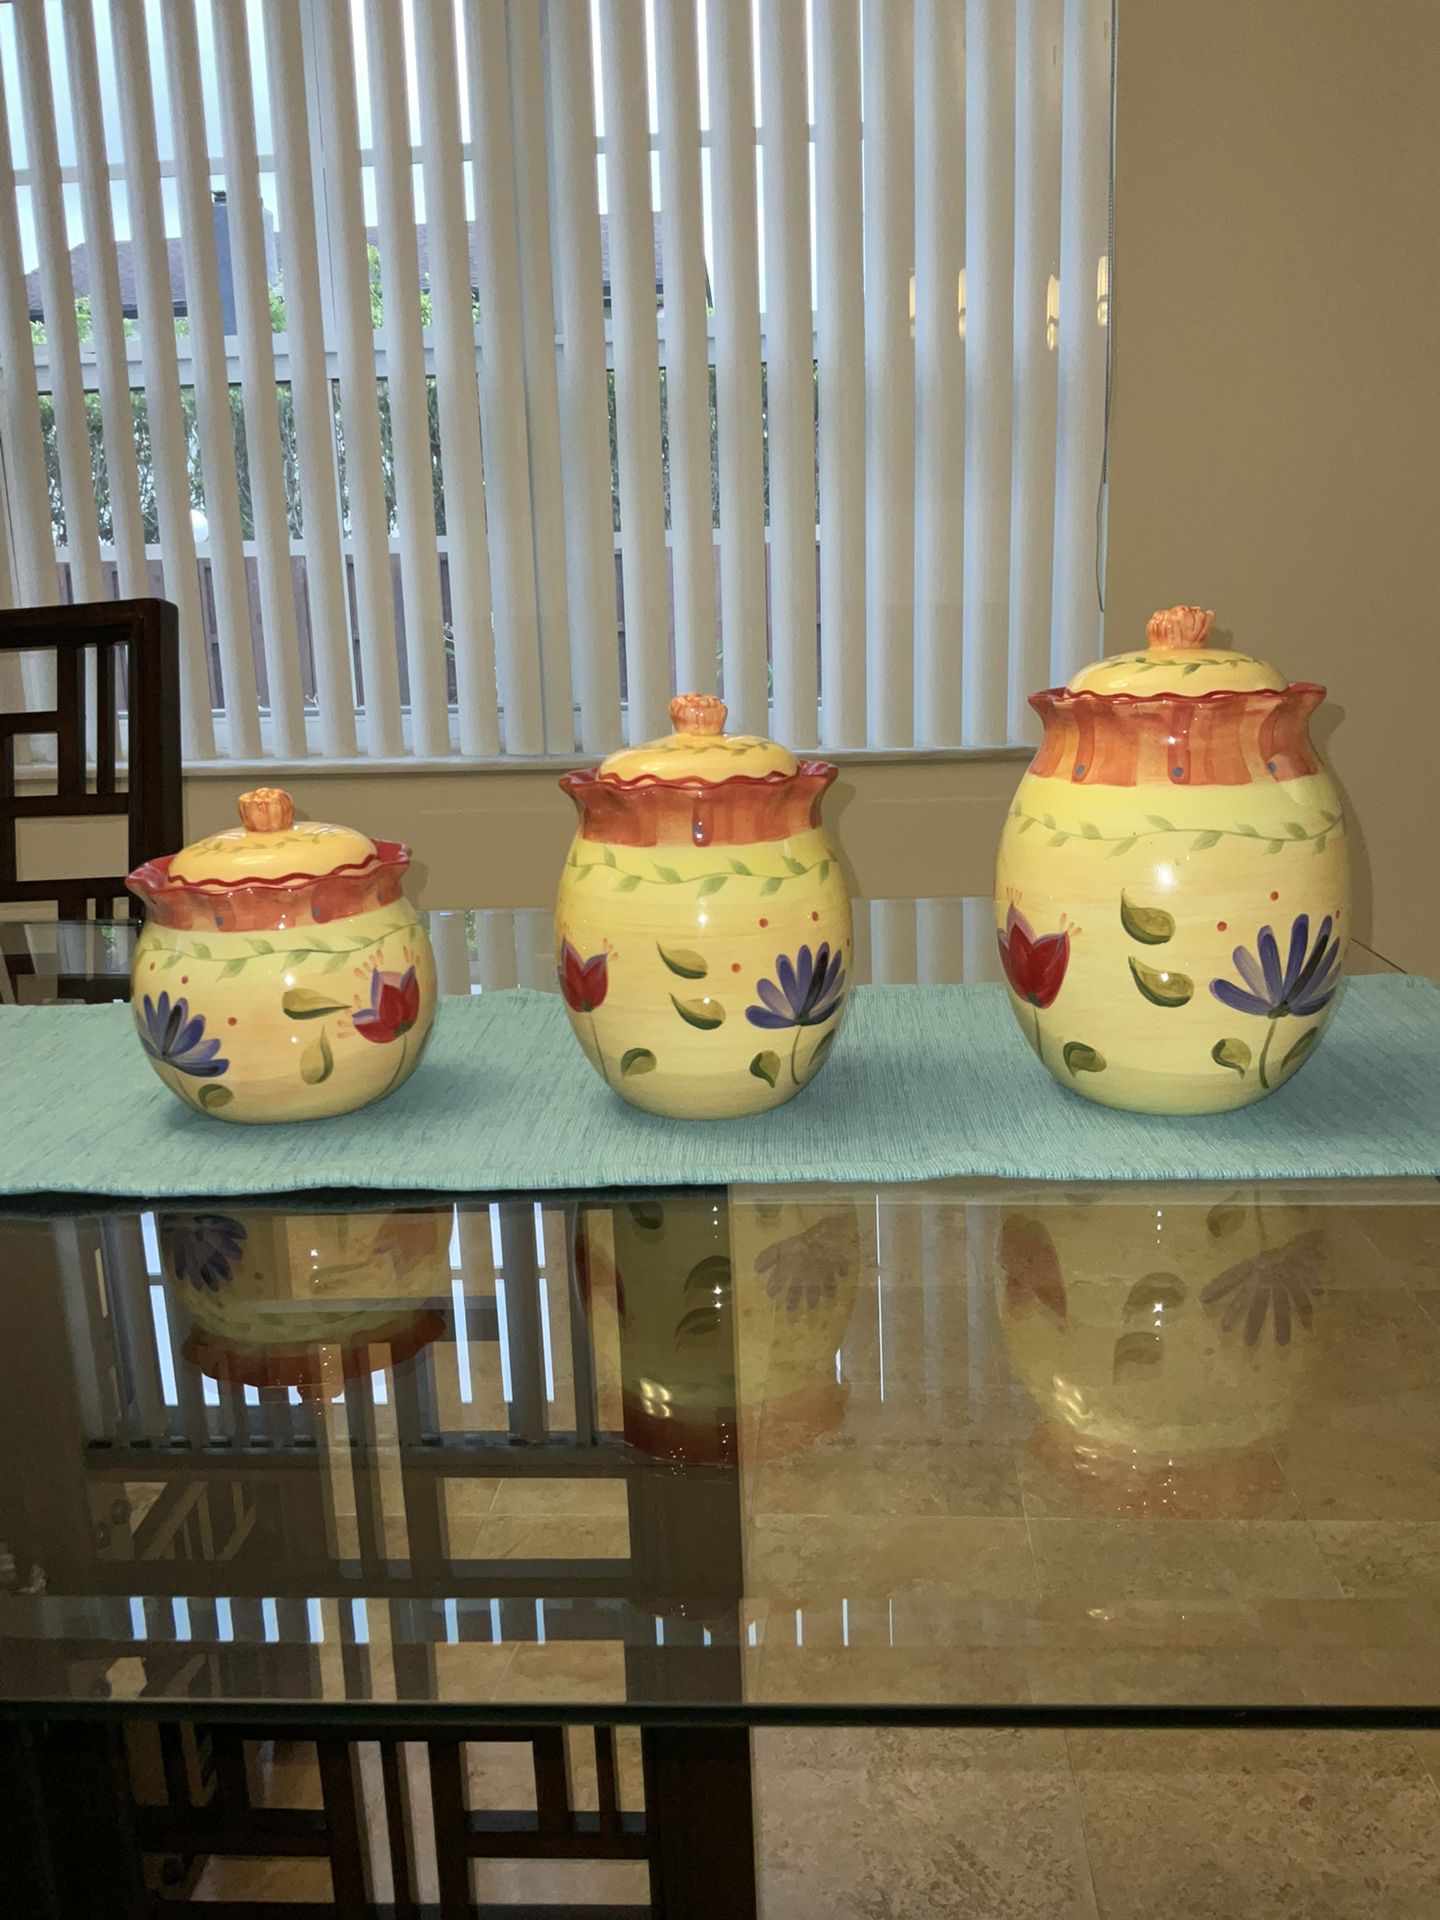 Pfaltzgraff kitchen 3 jar set, canister set with lids. Hand painted pottery, ceramic set.  Series: NAPOLI